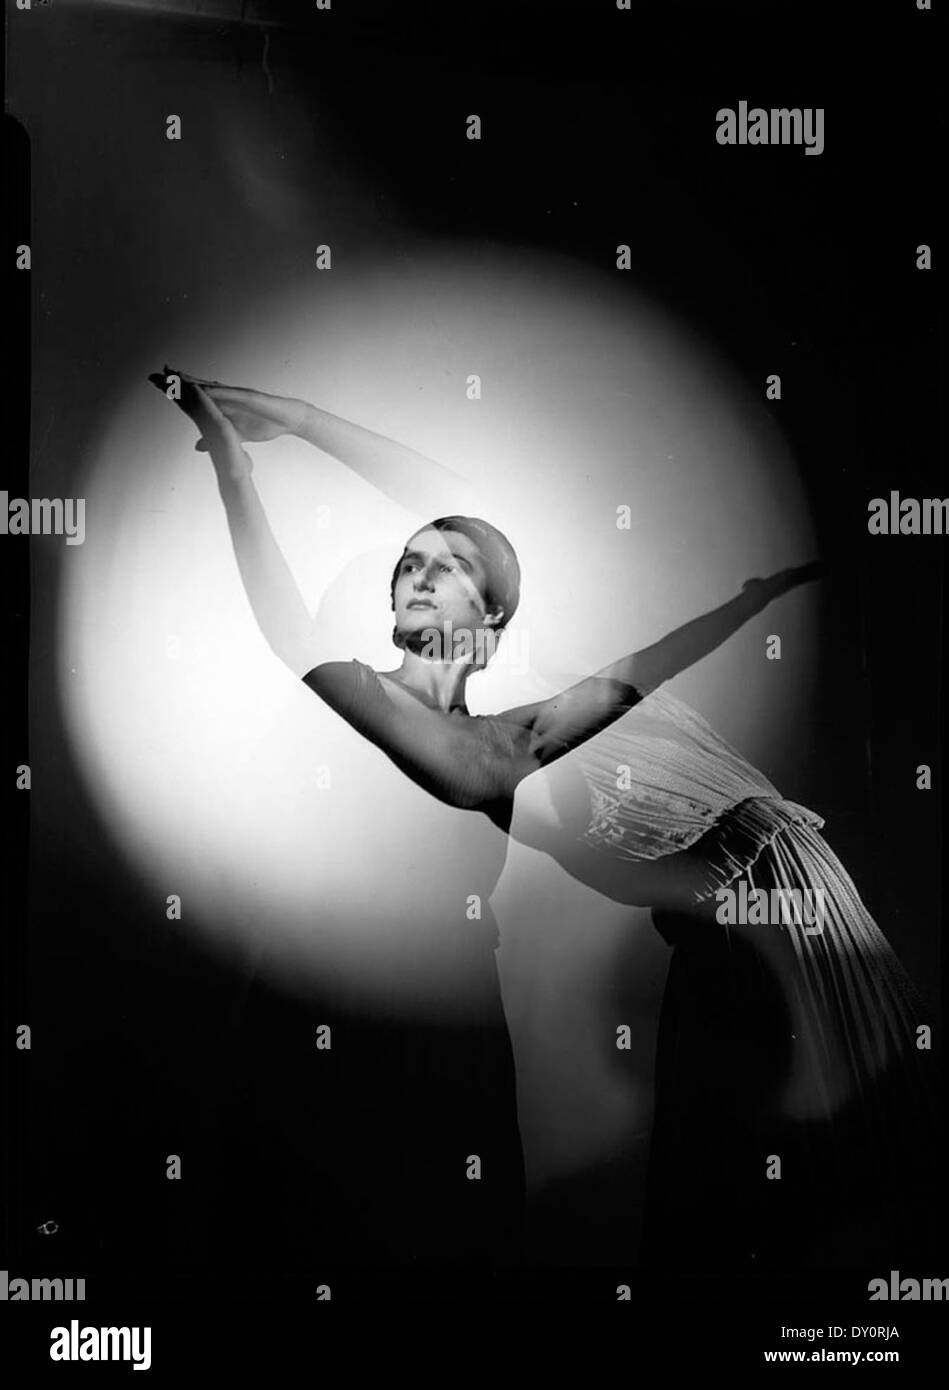 Tamara Tchinarova (later the first wife of Peter Finch) in the ballet Les Presages, Sydney, between 6 Dec 1936-Jan 1939 / studio photograph by Max Dupain Stock Photo